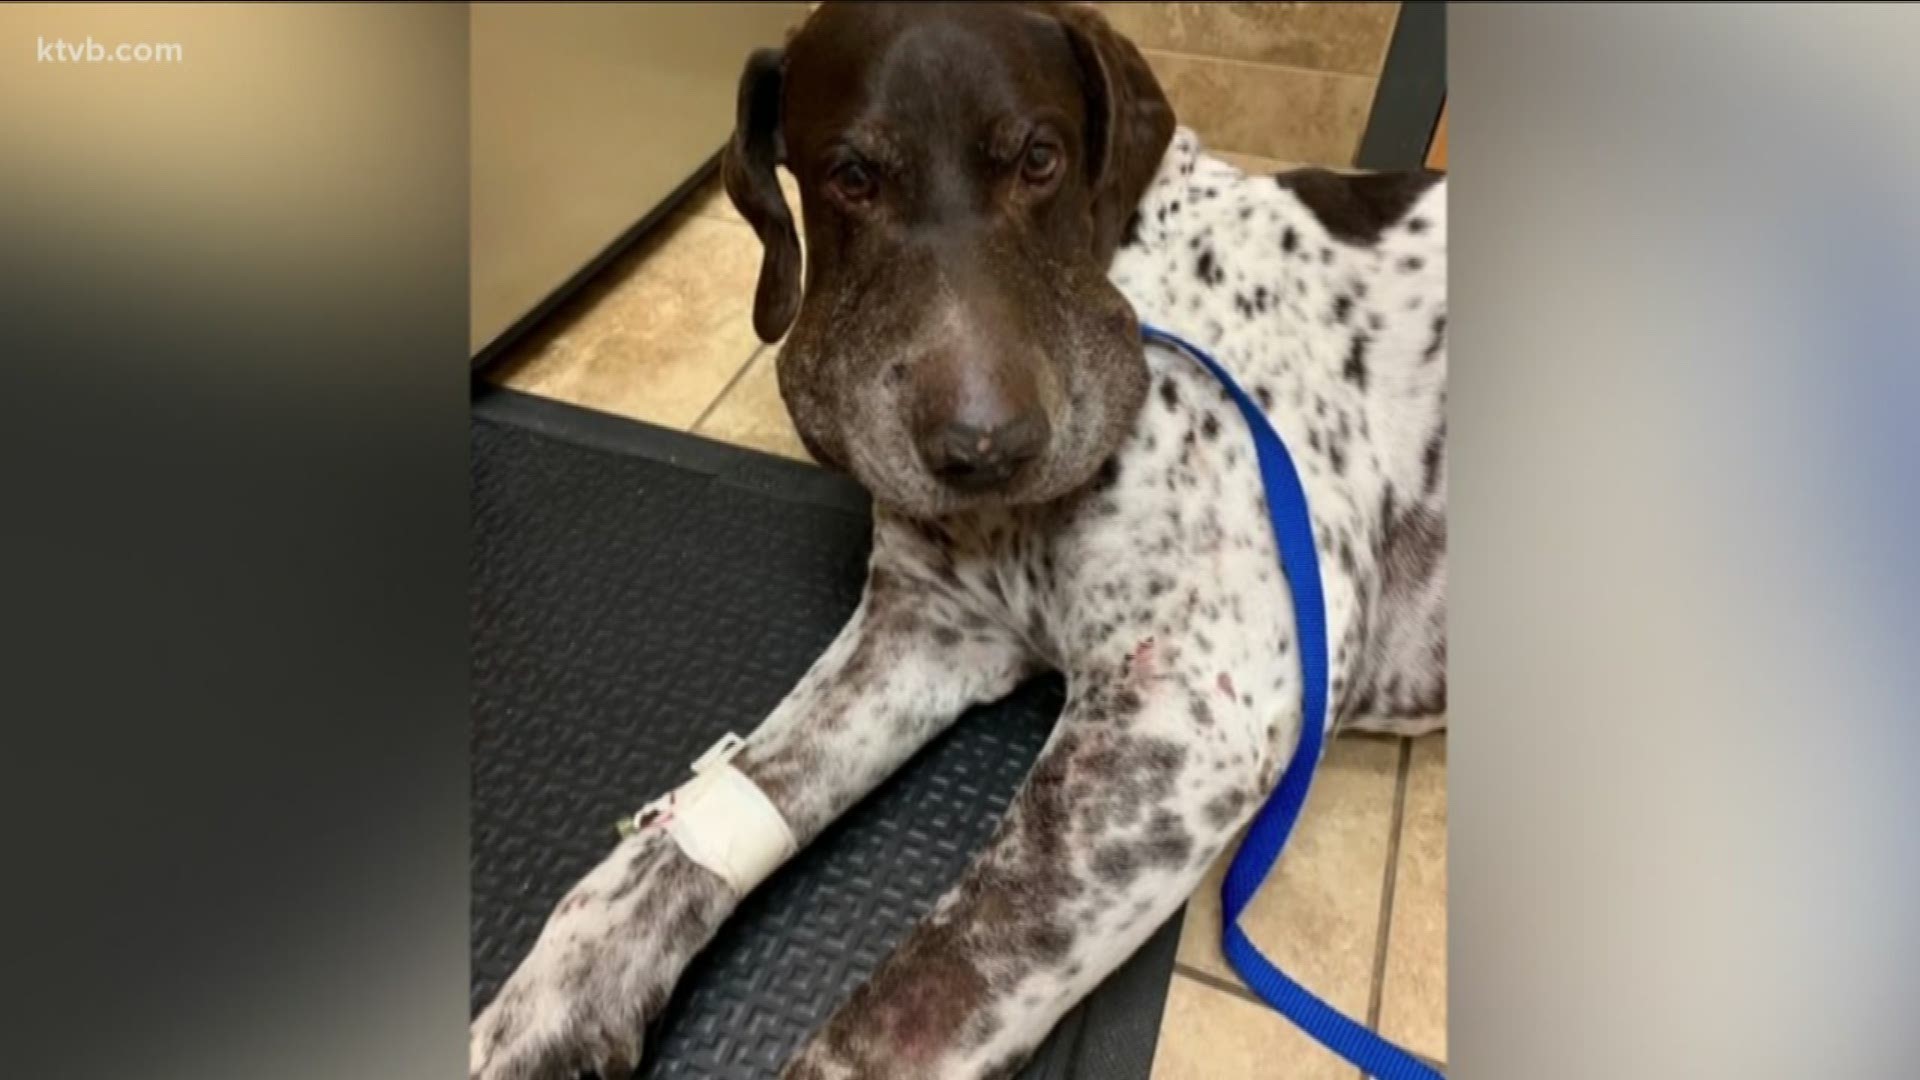 The dog's owners are sharing what happened so it will help others with pets.